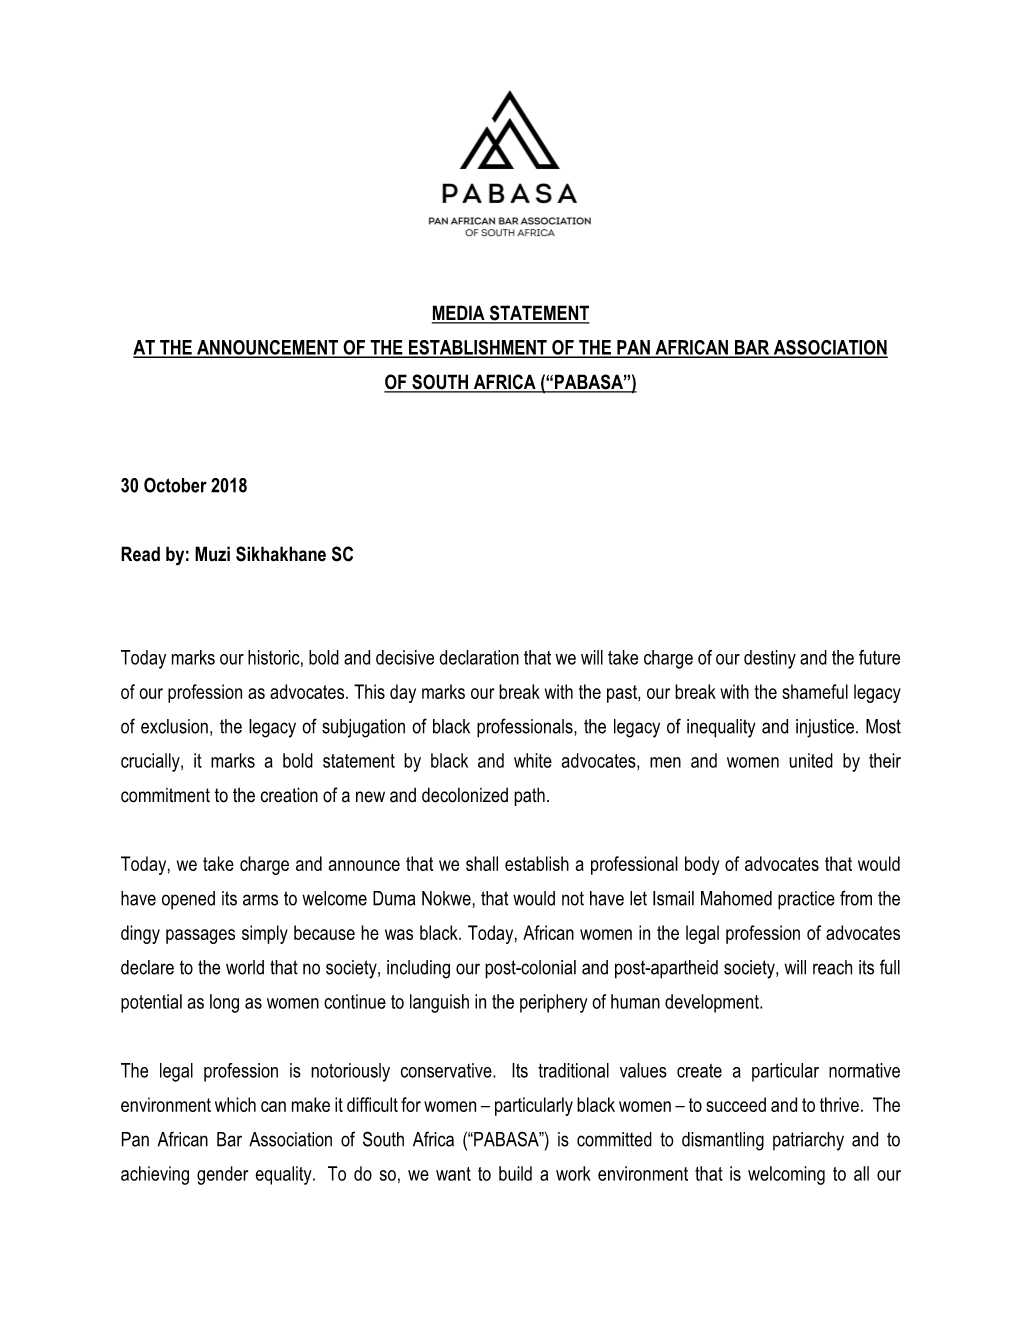 Media Statement at the Announcement of the Establishment of the Pan African Bar Association of South Africa (“Pabasa”)